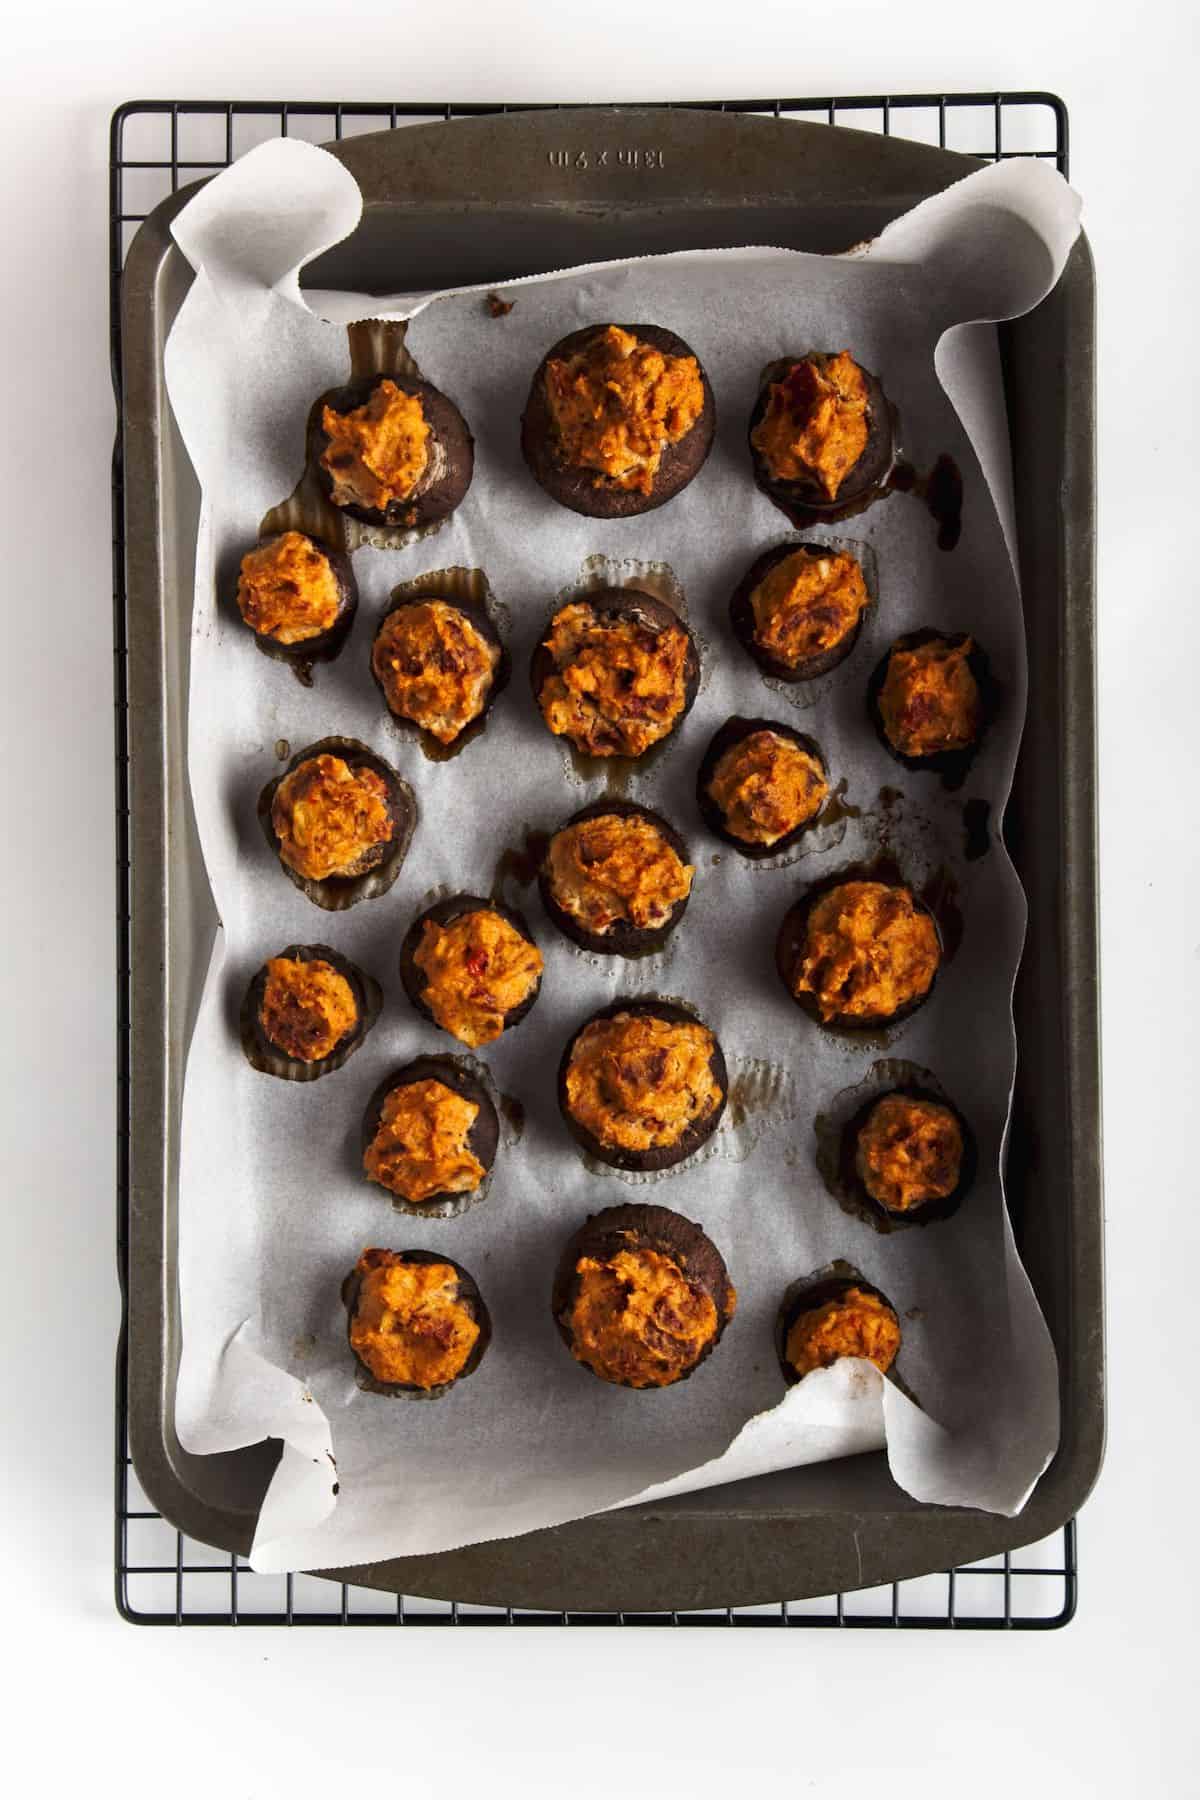 stuffed mushrooms on parchment on a baking sheet.